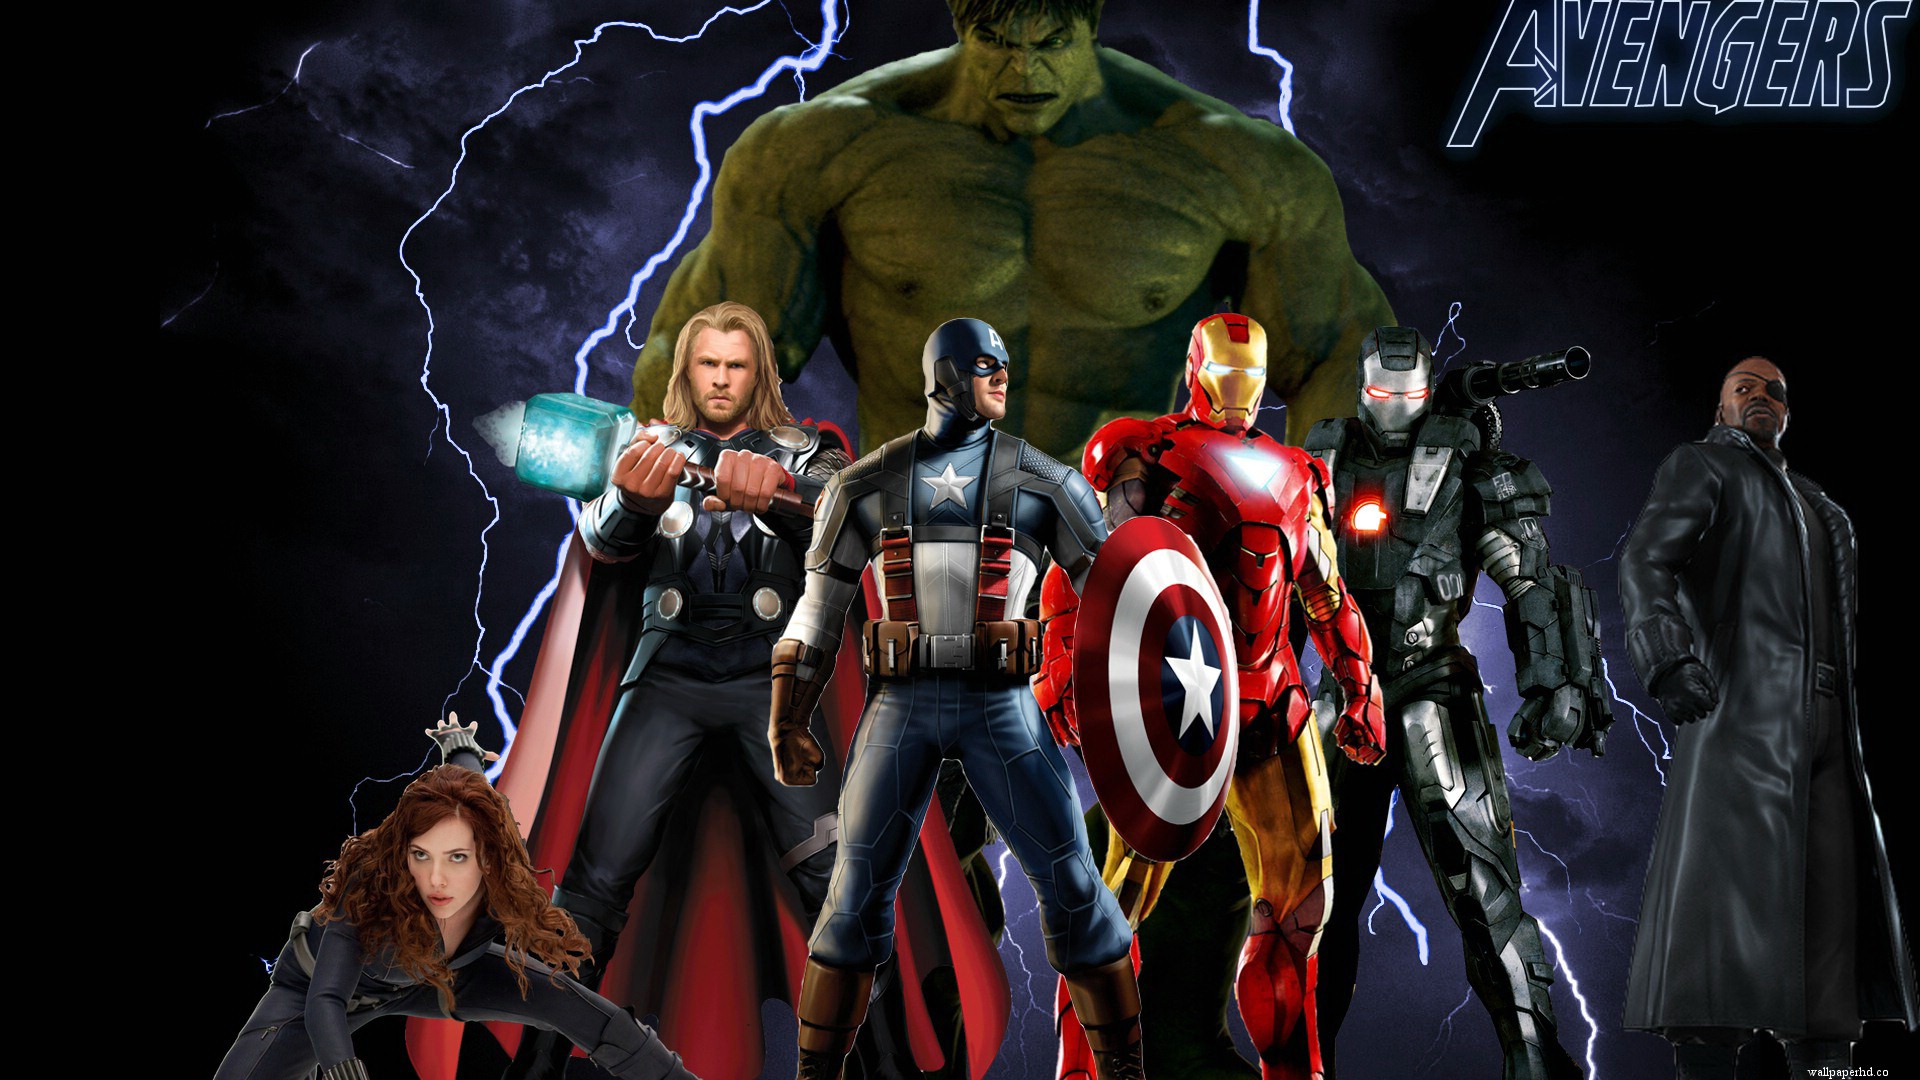 The Avengers Wallpapers HD Movie Wallpapers The Avengers Wallpapers